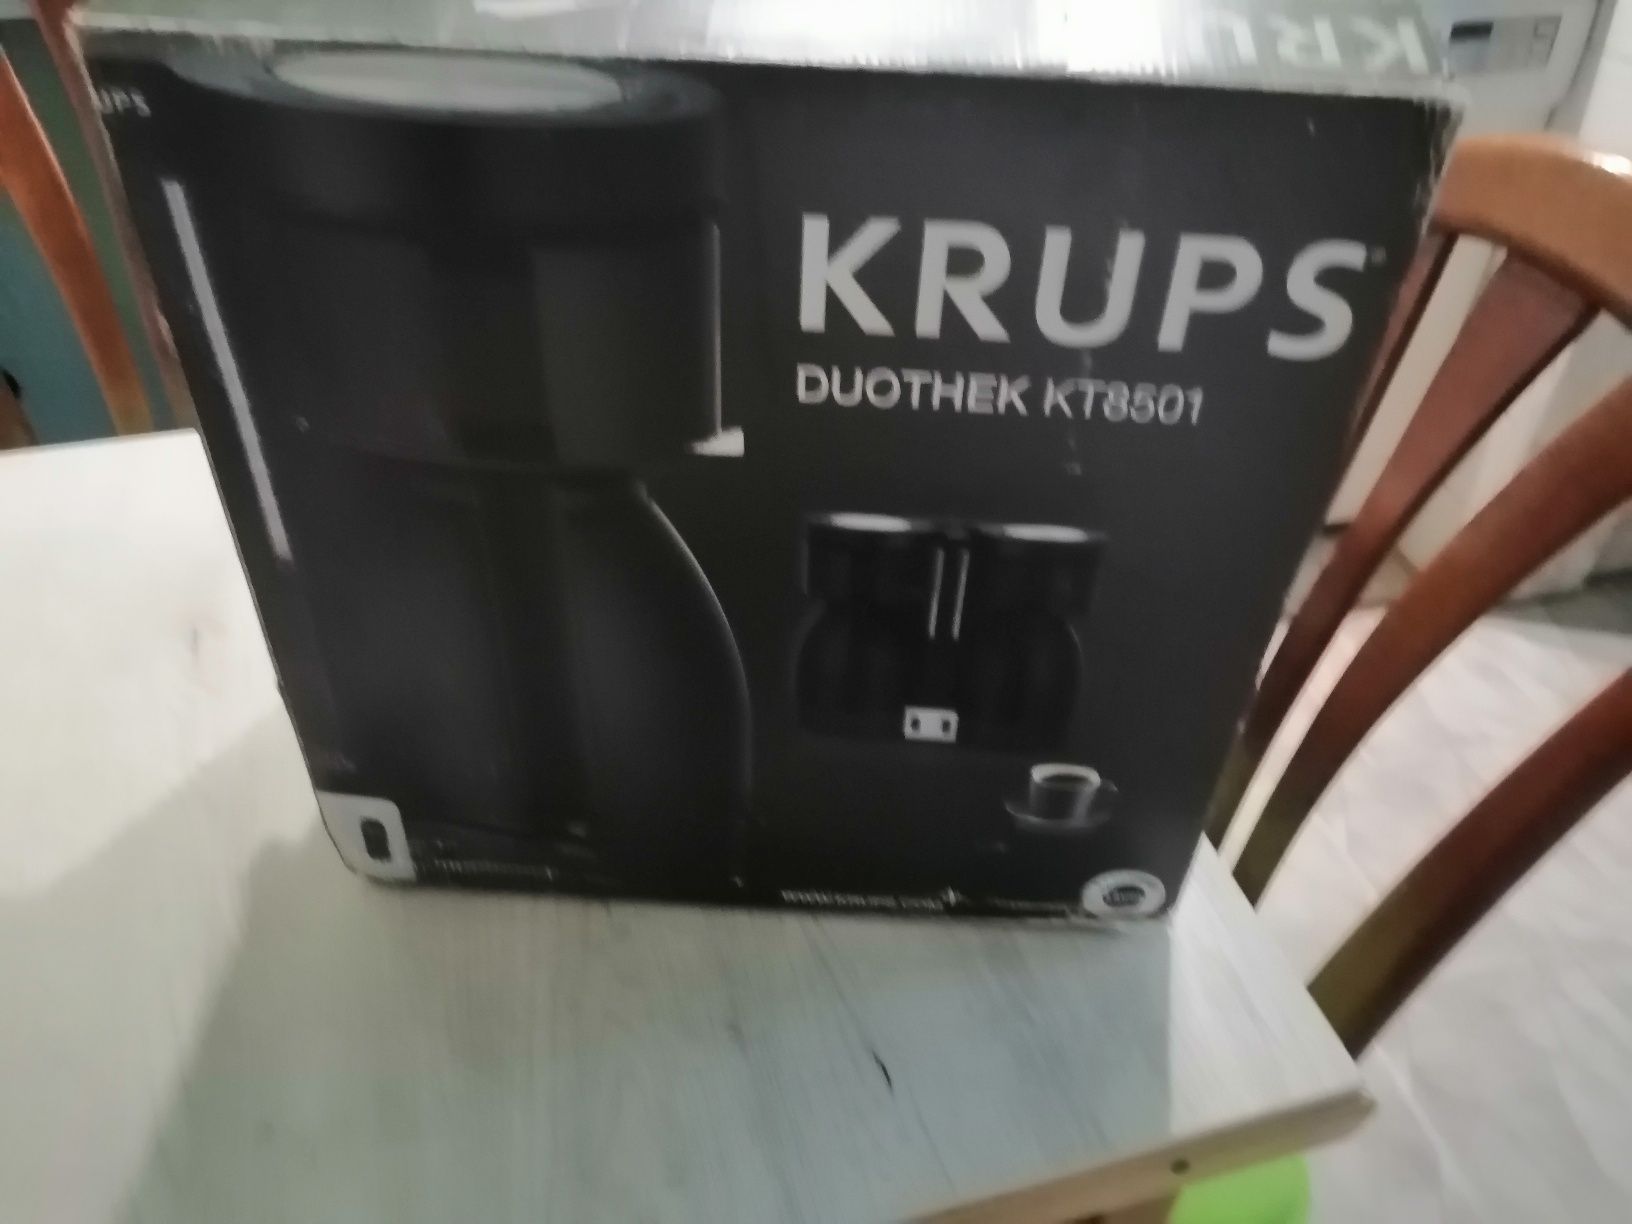 Krups шварц кафе машина KT 8501 Duothek Thermo Drip Coffee